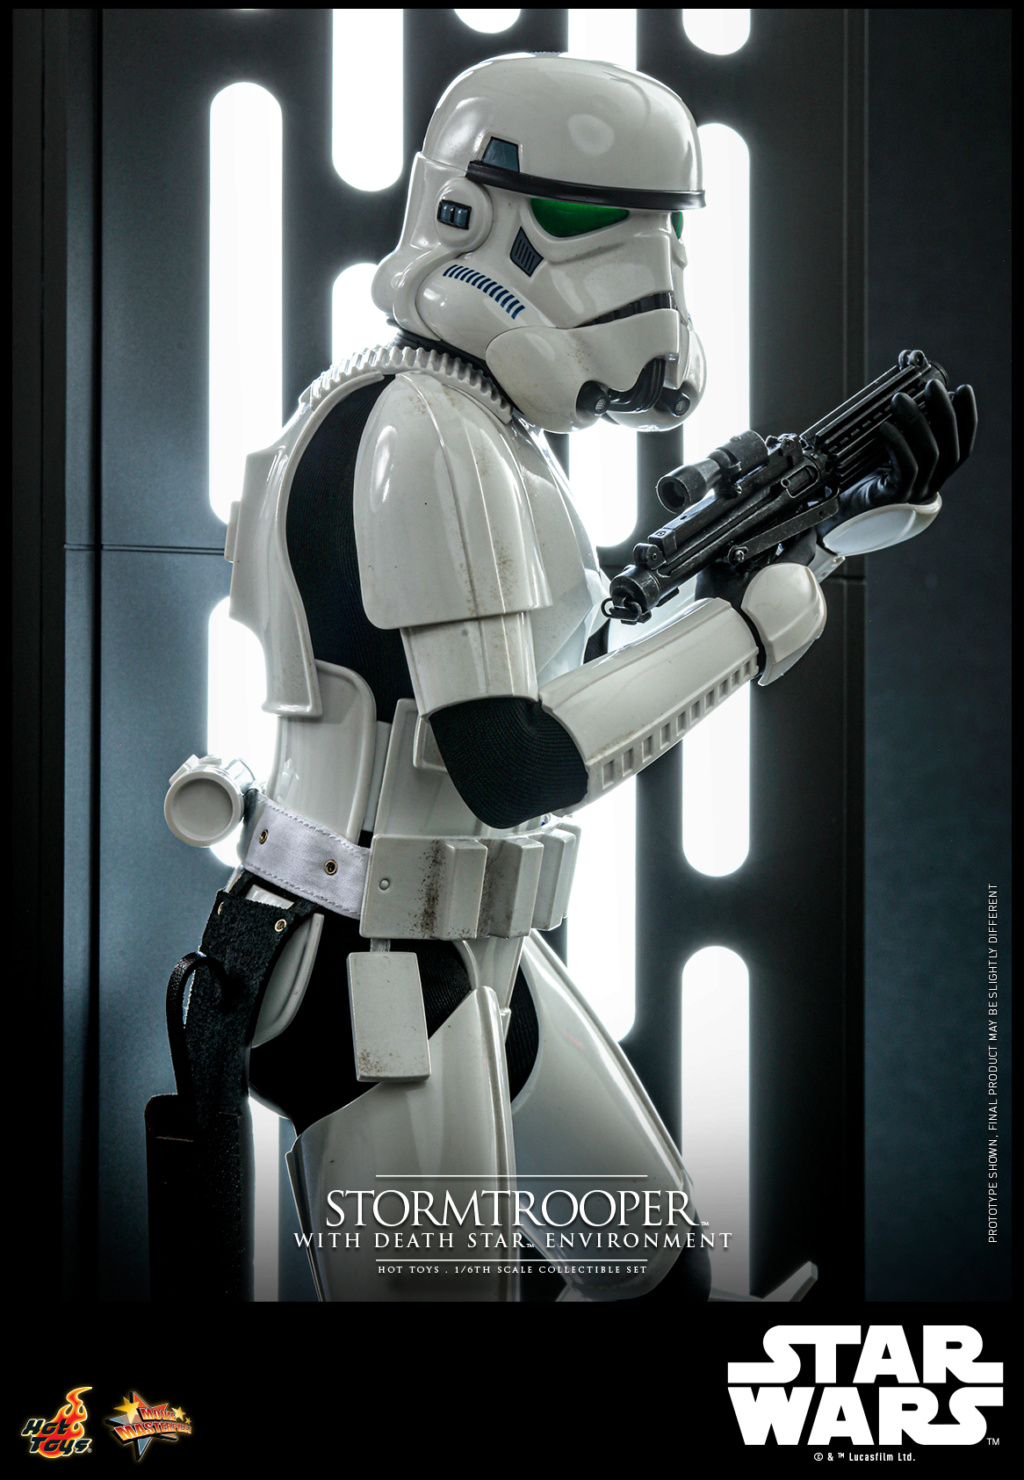 NEW PRODUCT: HOT TOYS STAR WARS 1/6 Stormtrooper with Death Star Environment Set 0221